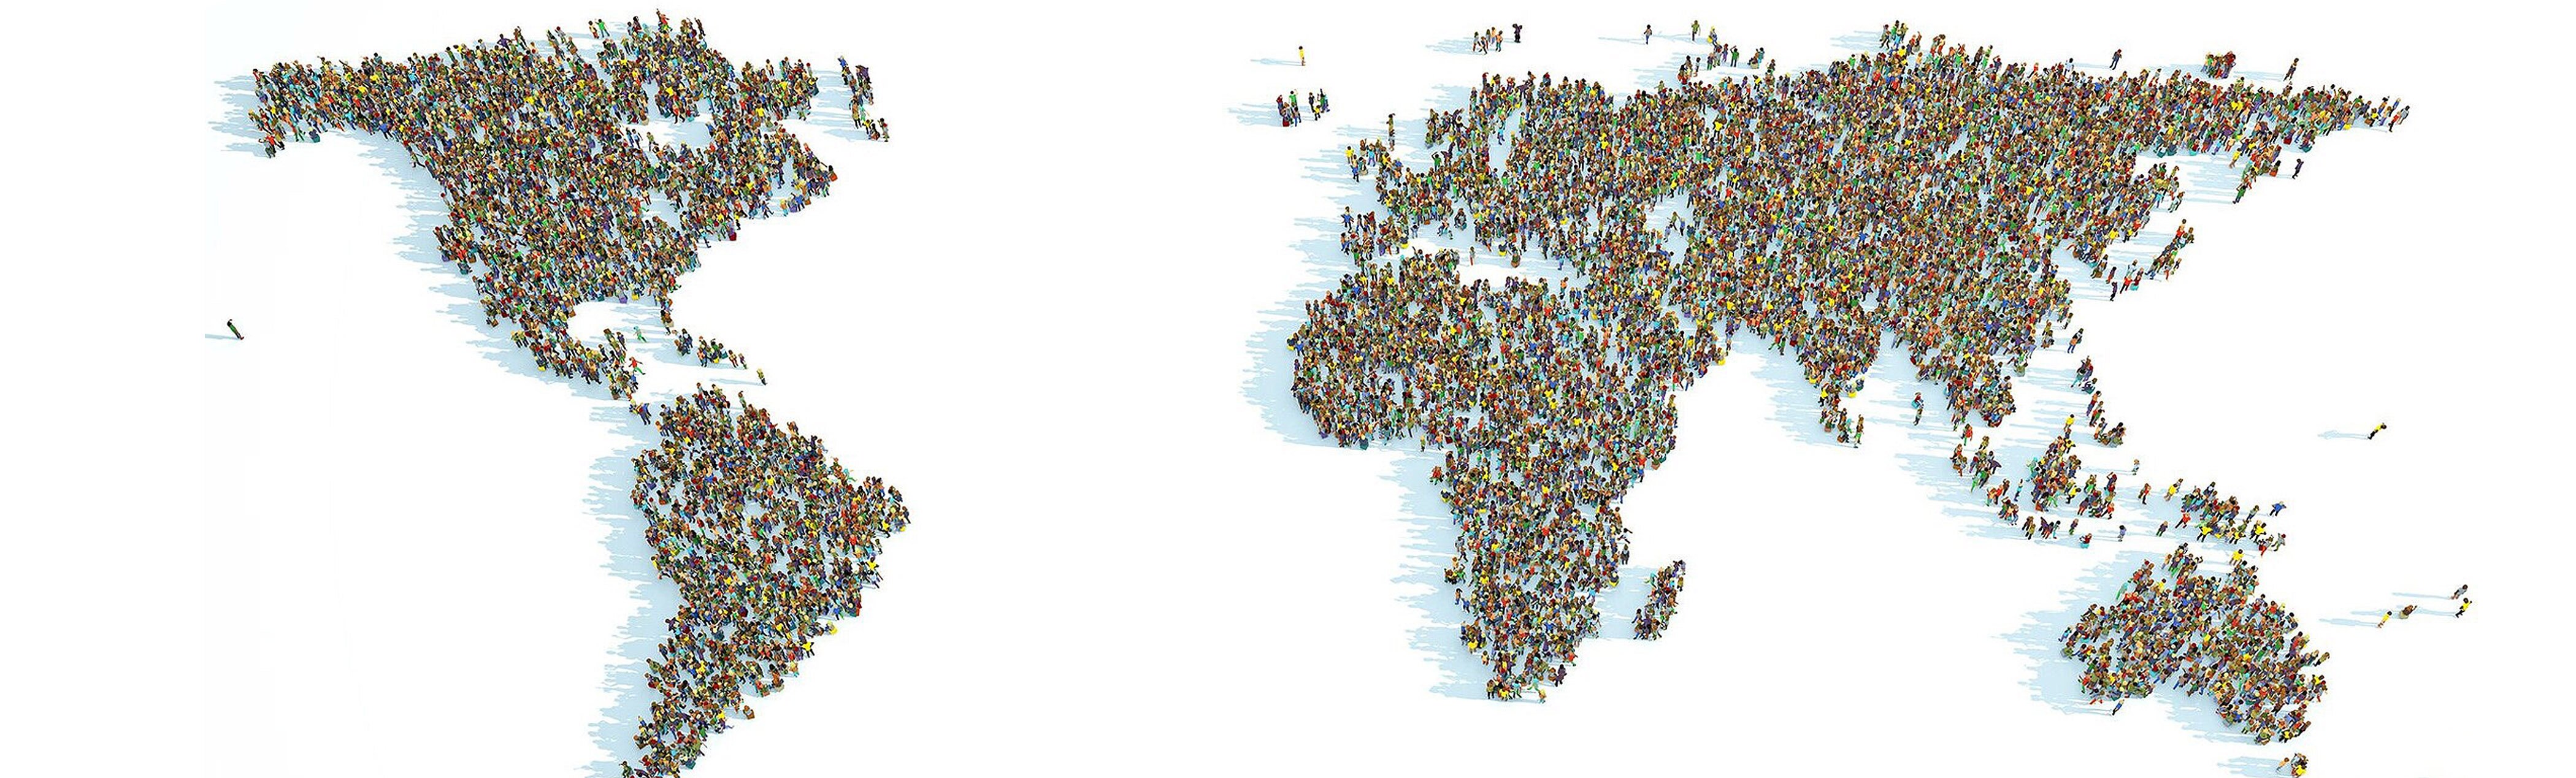 A world map consisting of thousands of people - 3d illustration